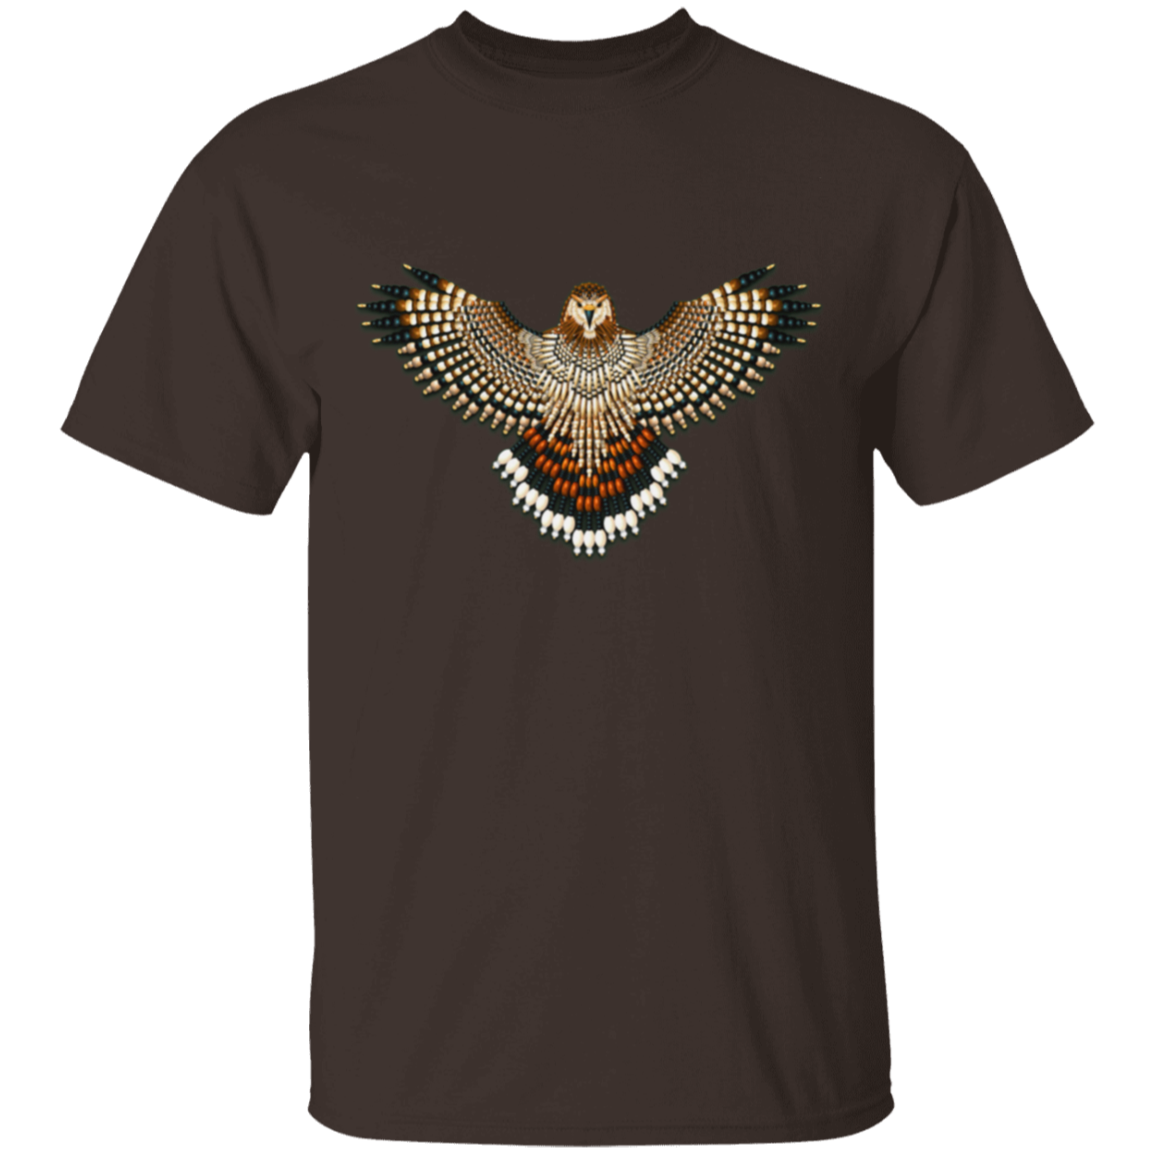 Beaded Red-Tailed Hawk T-Shirt - Powwow Store